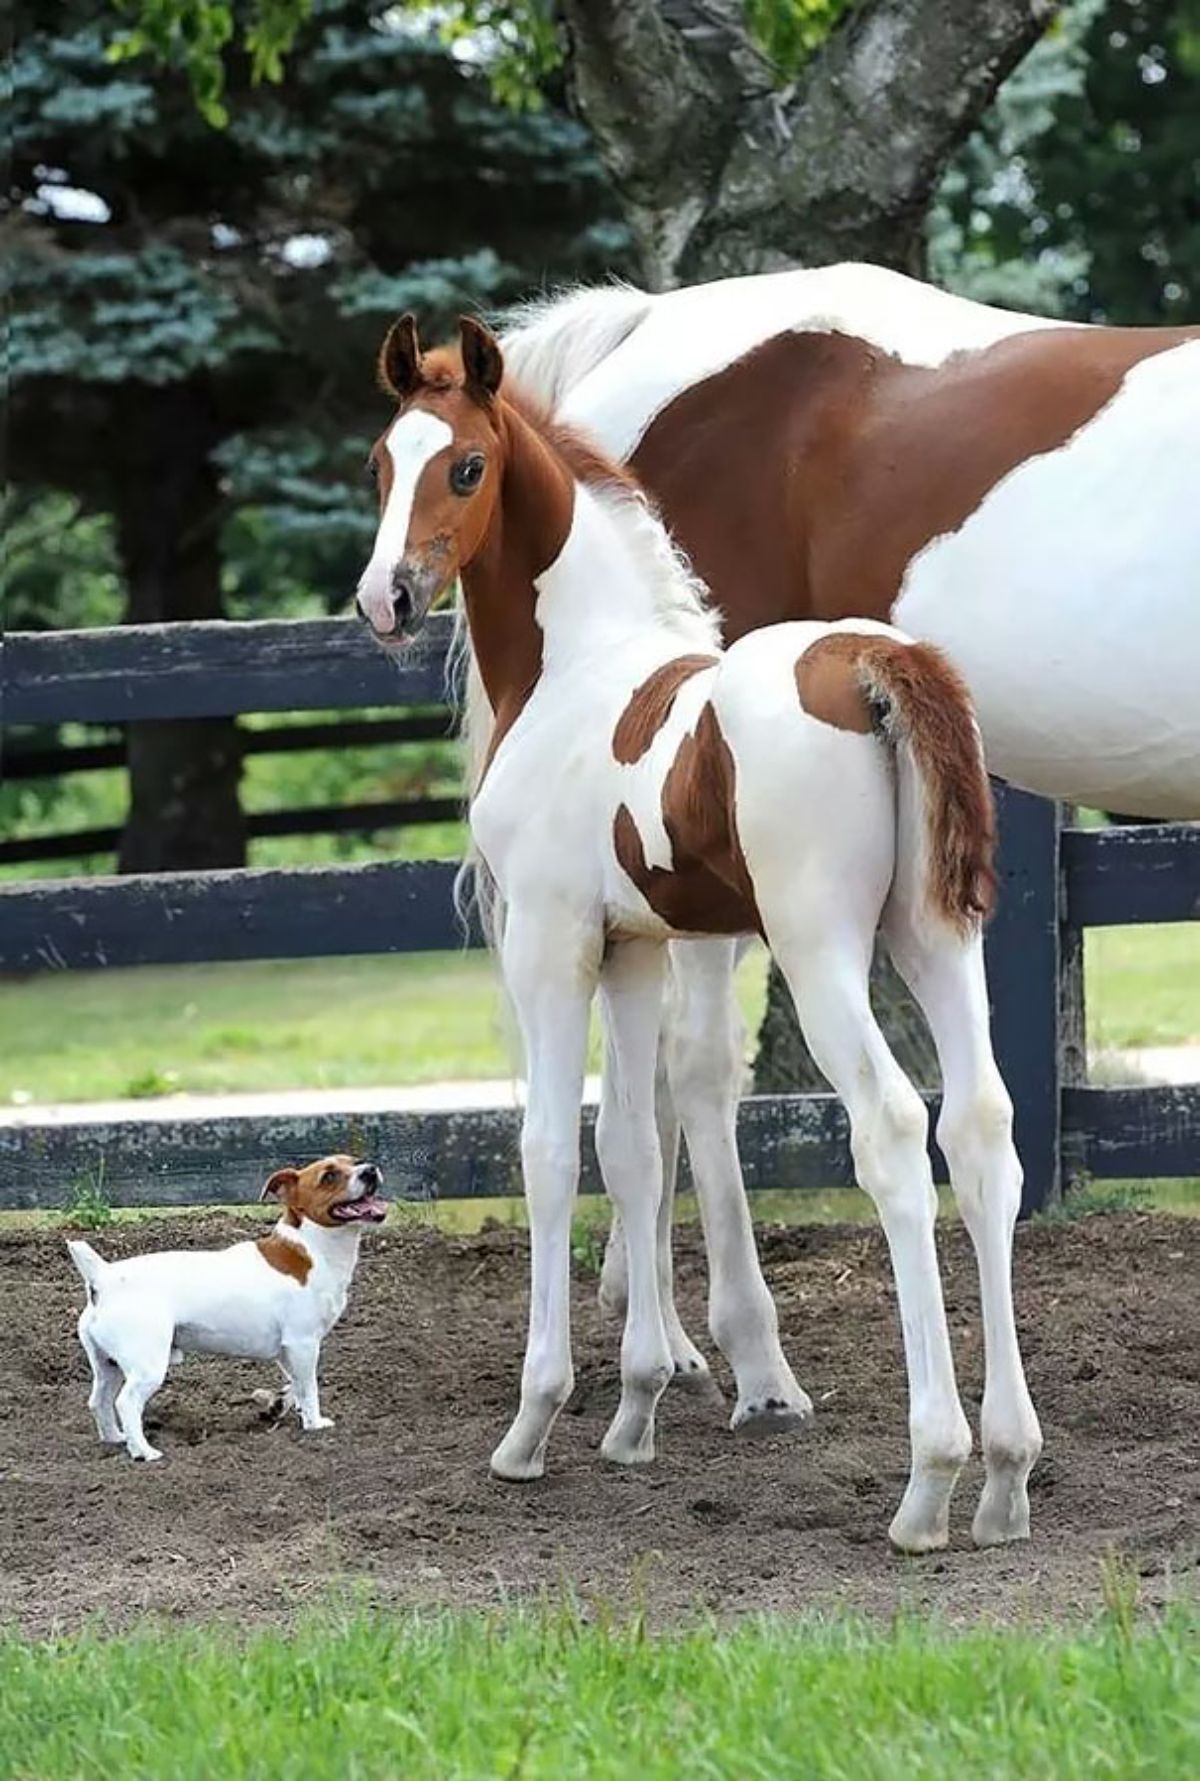 brown and white horse and calf standing next to a small brown and white dog